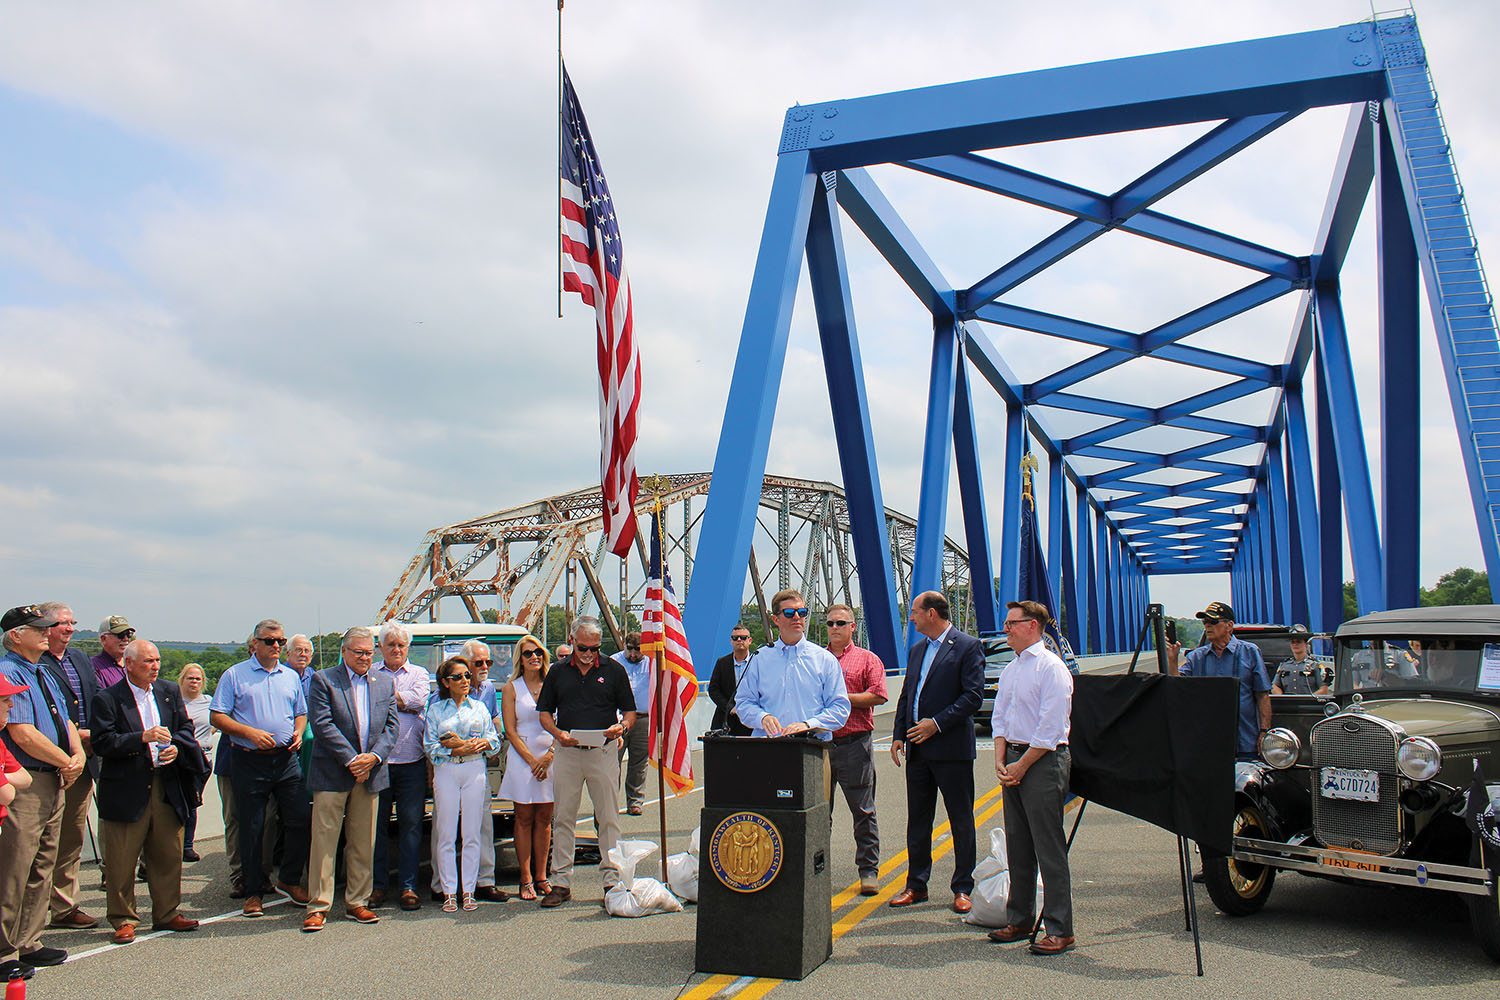 Kentucky Gov. Andy Beshear gives remarks during the opening of the Jim R. Smith Memorial Bridge May 15. The bridge carries U.S. 60 over the Cumberland River in Smithland, Ky. (Photo by Shelley Byrne)